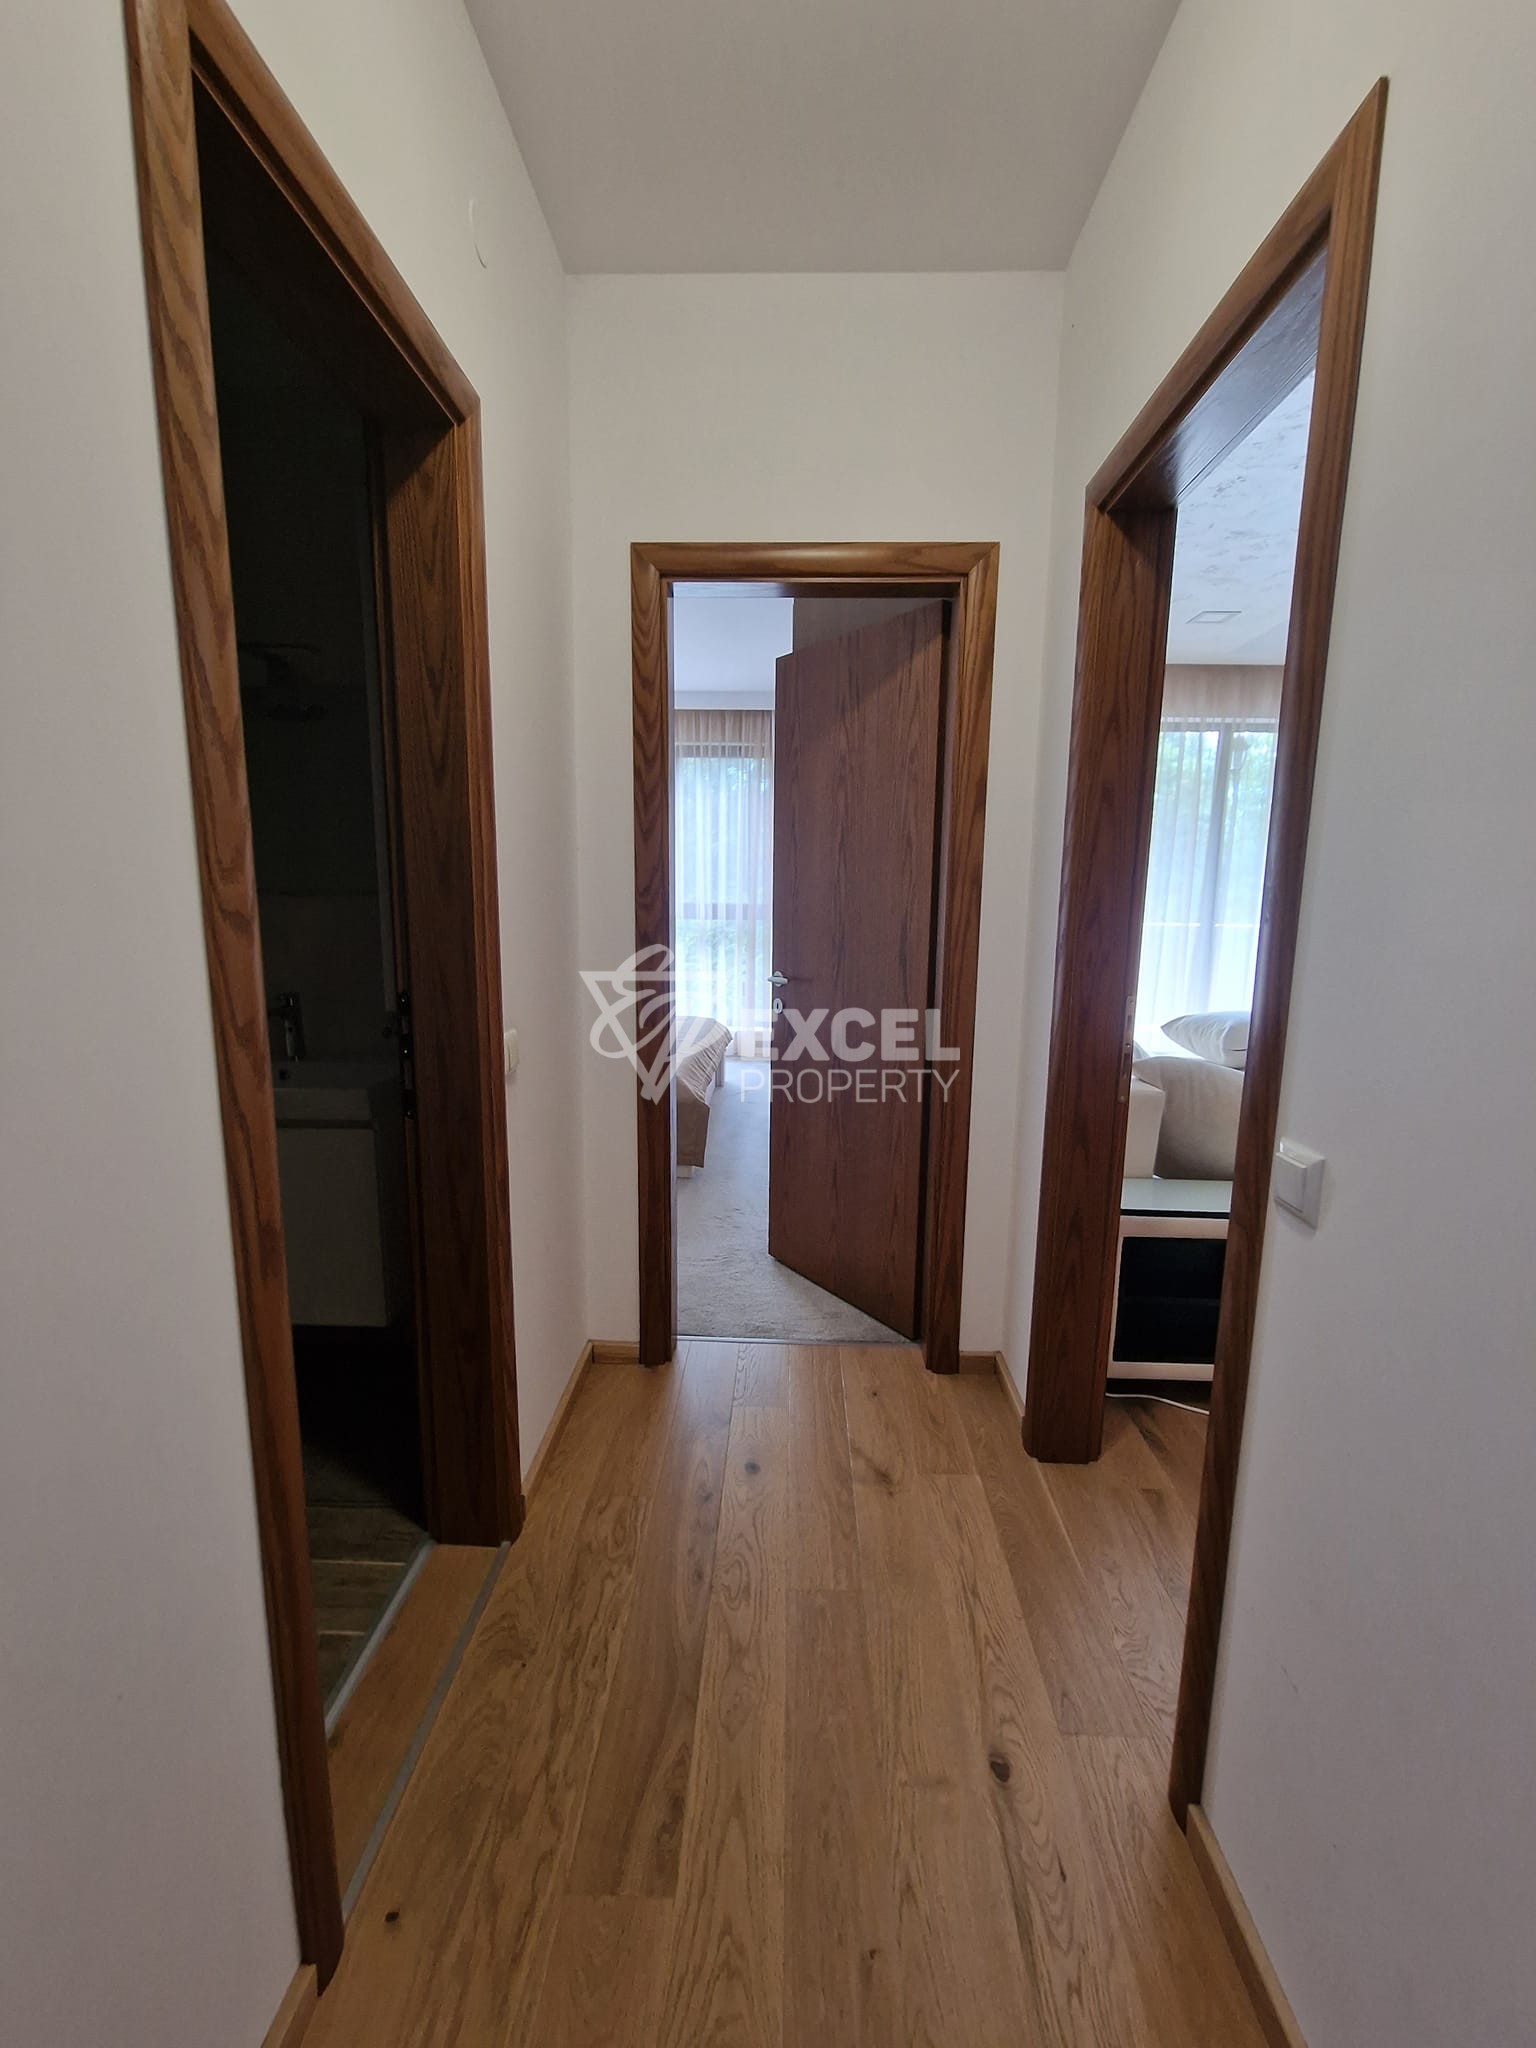 Two bedroom apartment with garage for rent in the Maxi complex, Vitosha quarter, Sofia